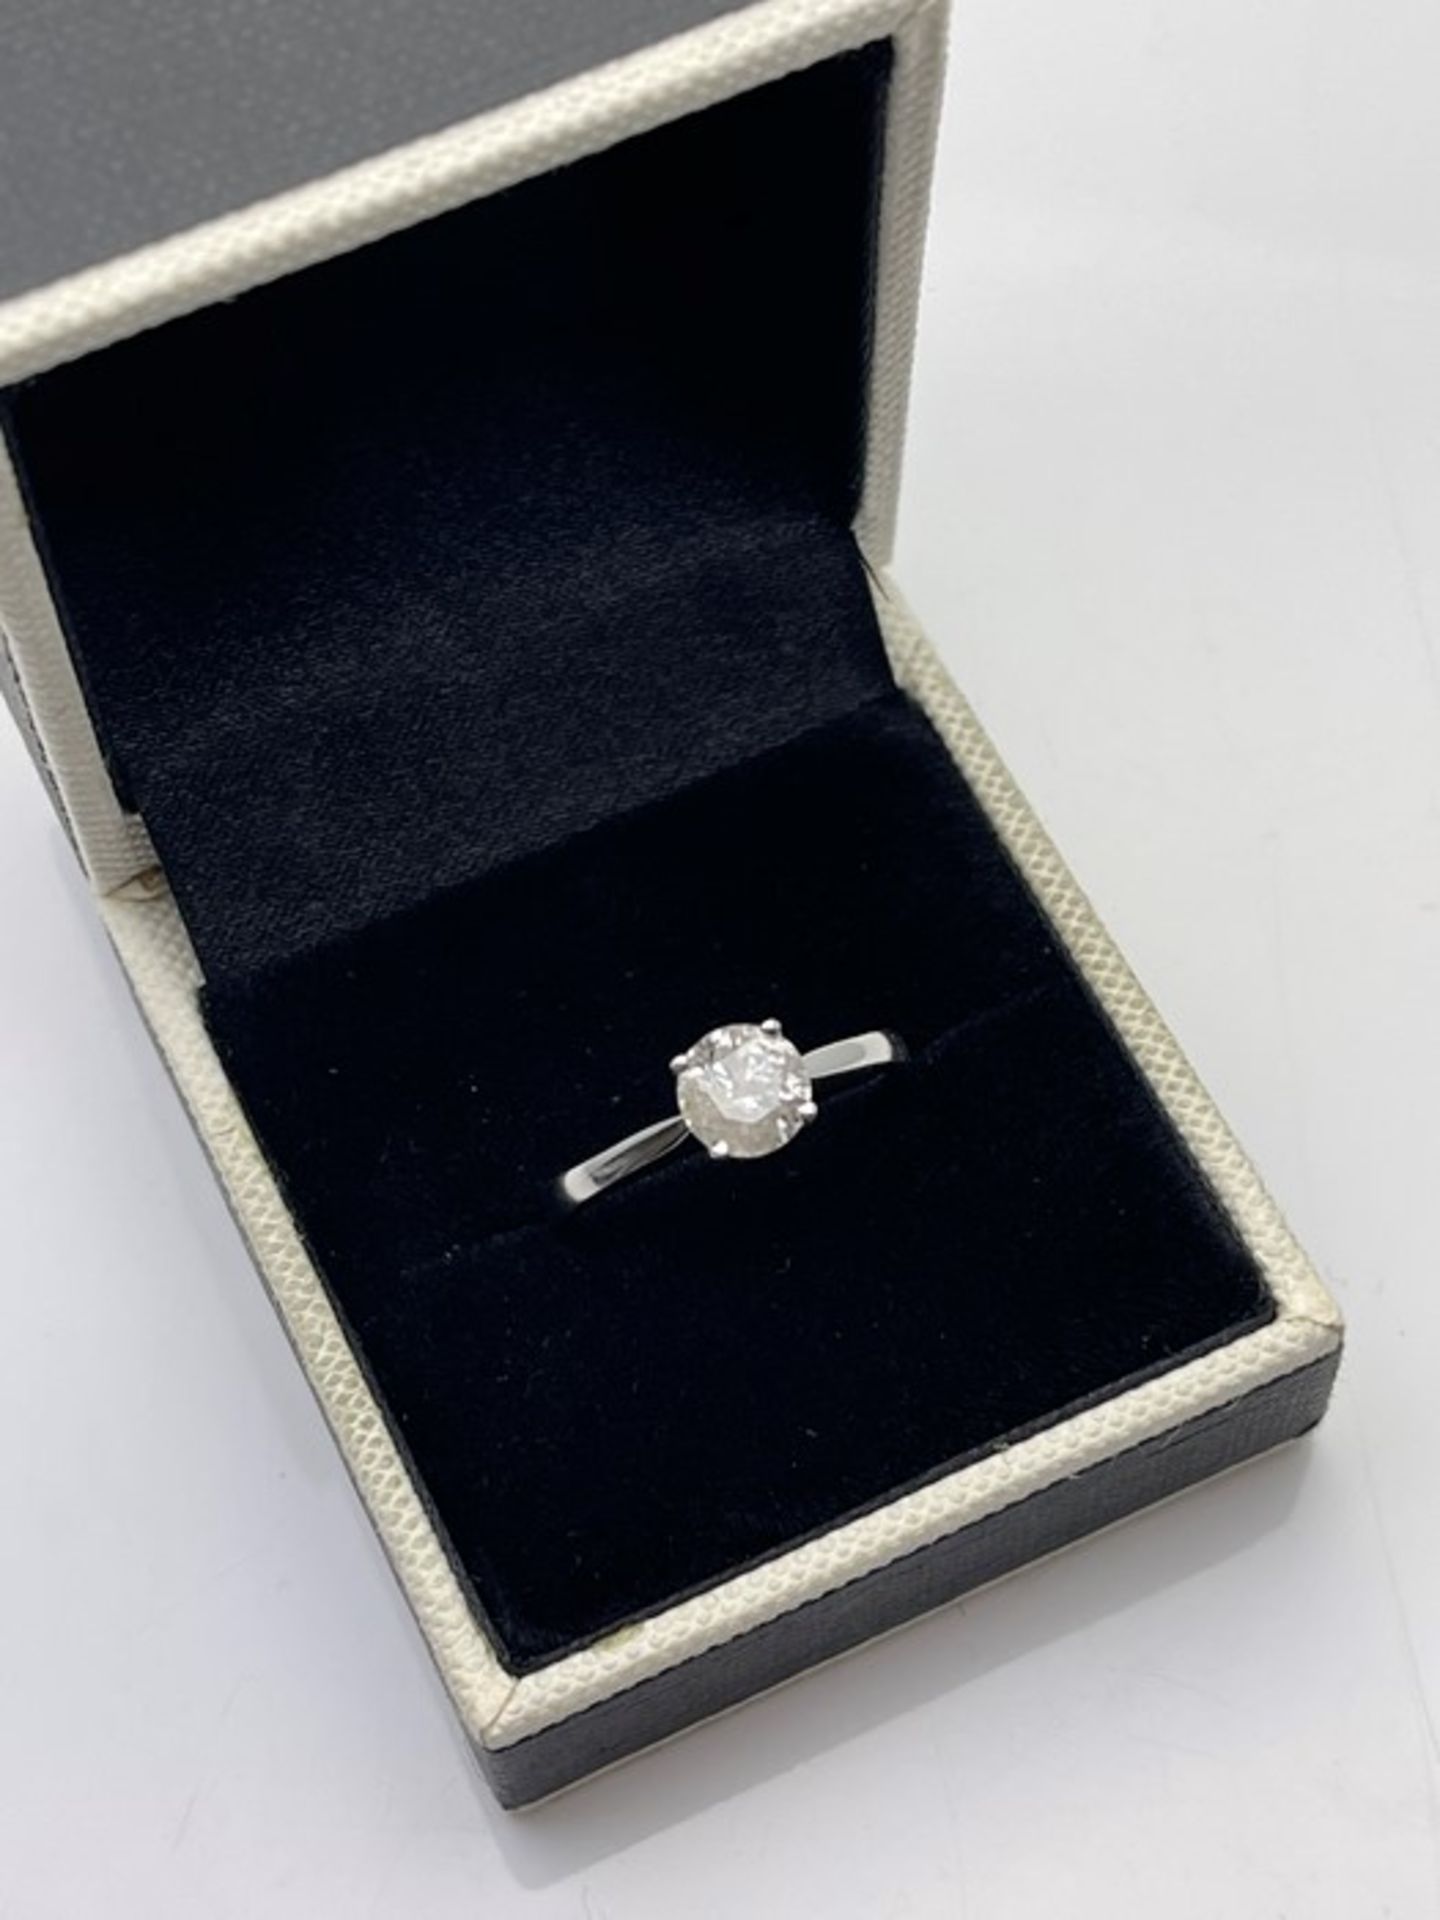 18CT WHITE GOLD LADIES DIAMOND SOLITAIRE RING, SET WITH A 1.02 SINGLE BRILLIANT CUT DIAMOND - Image 2 of 2